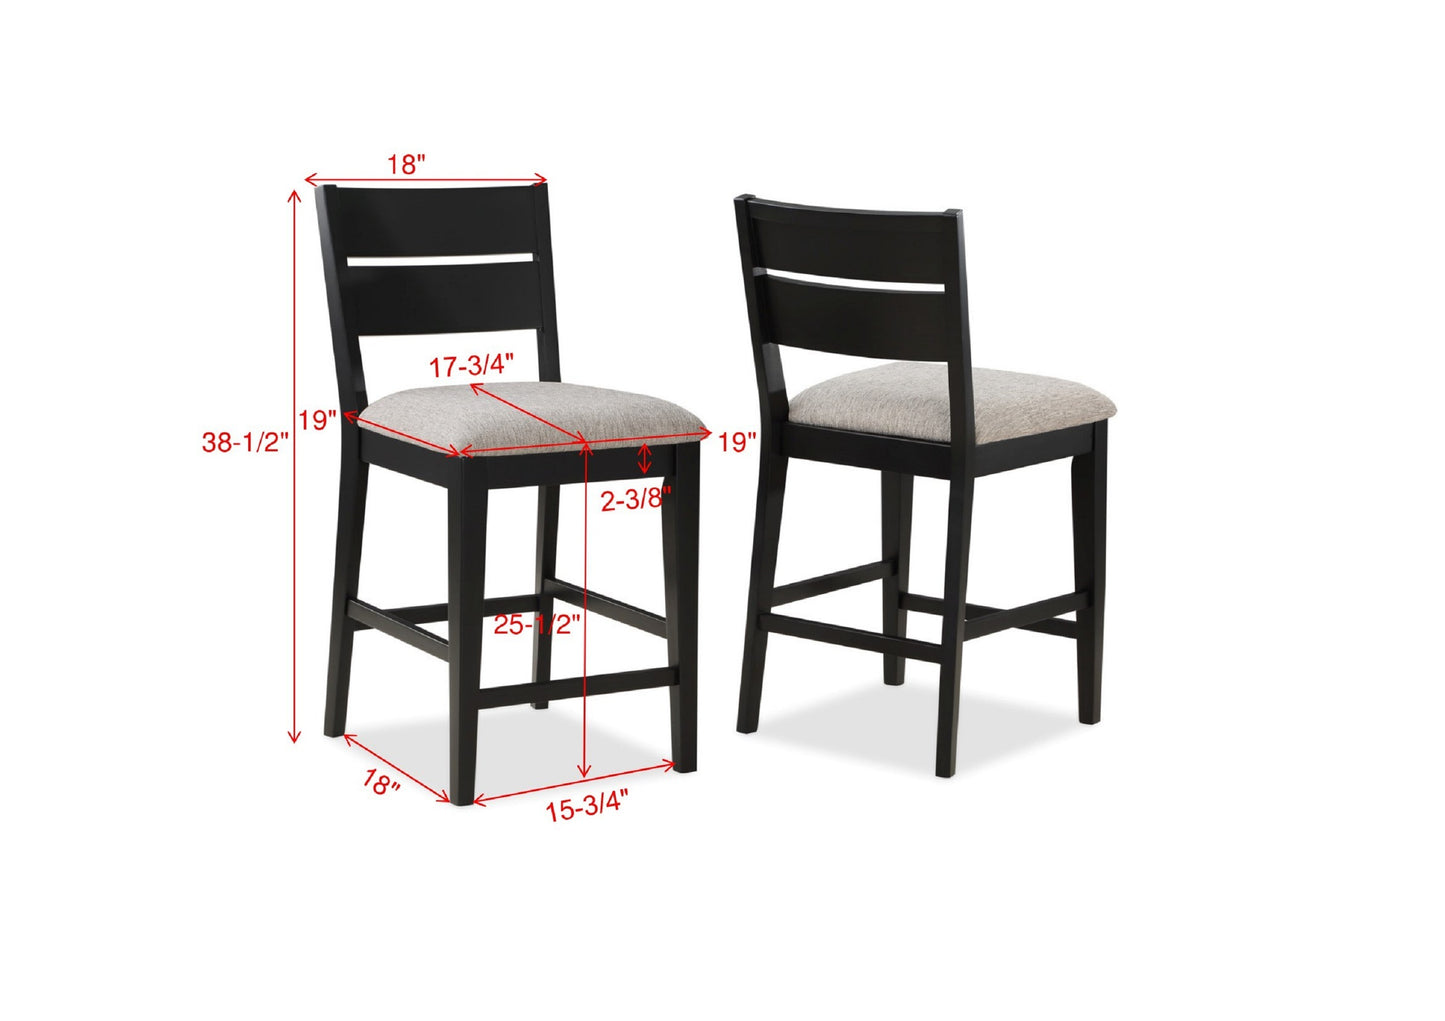 Contemporary 2pc Counter Height Dining Side Chair Upholstered Seat Ladder Back Dark Frame Gray Fabric Upholstery Dining Room Furniture